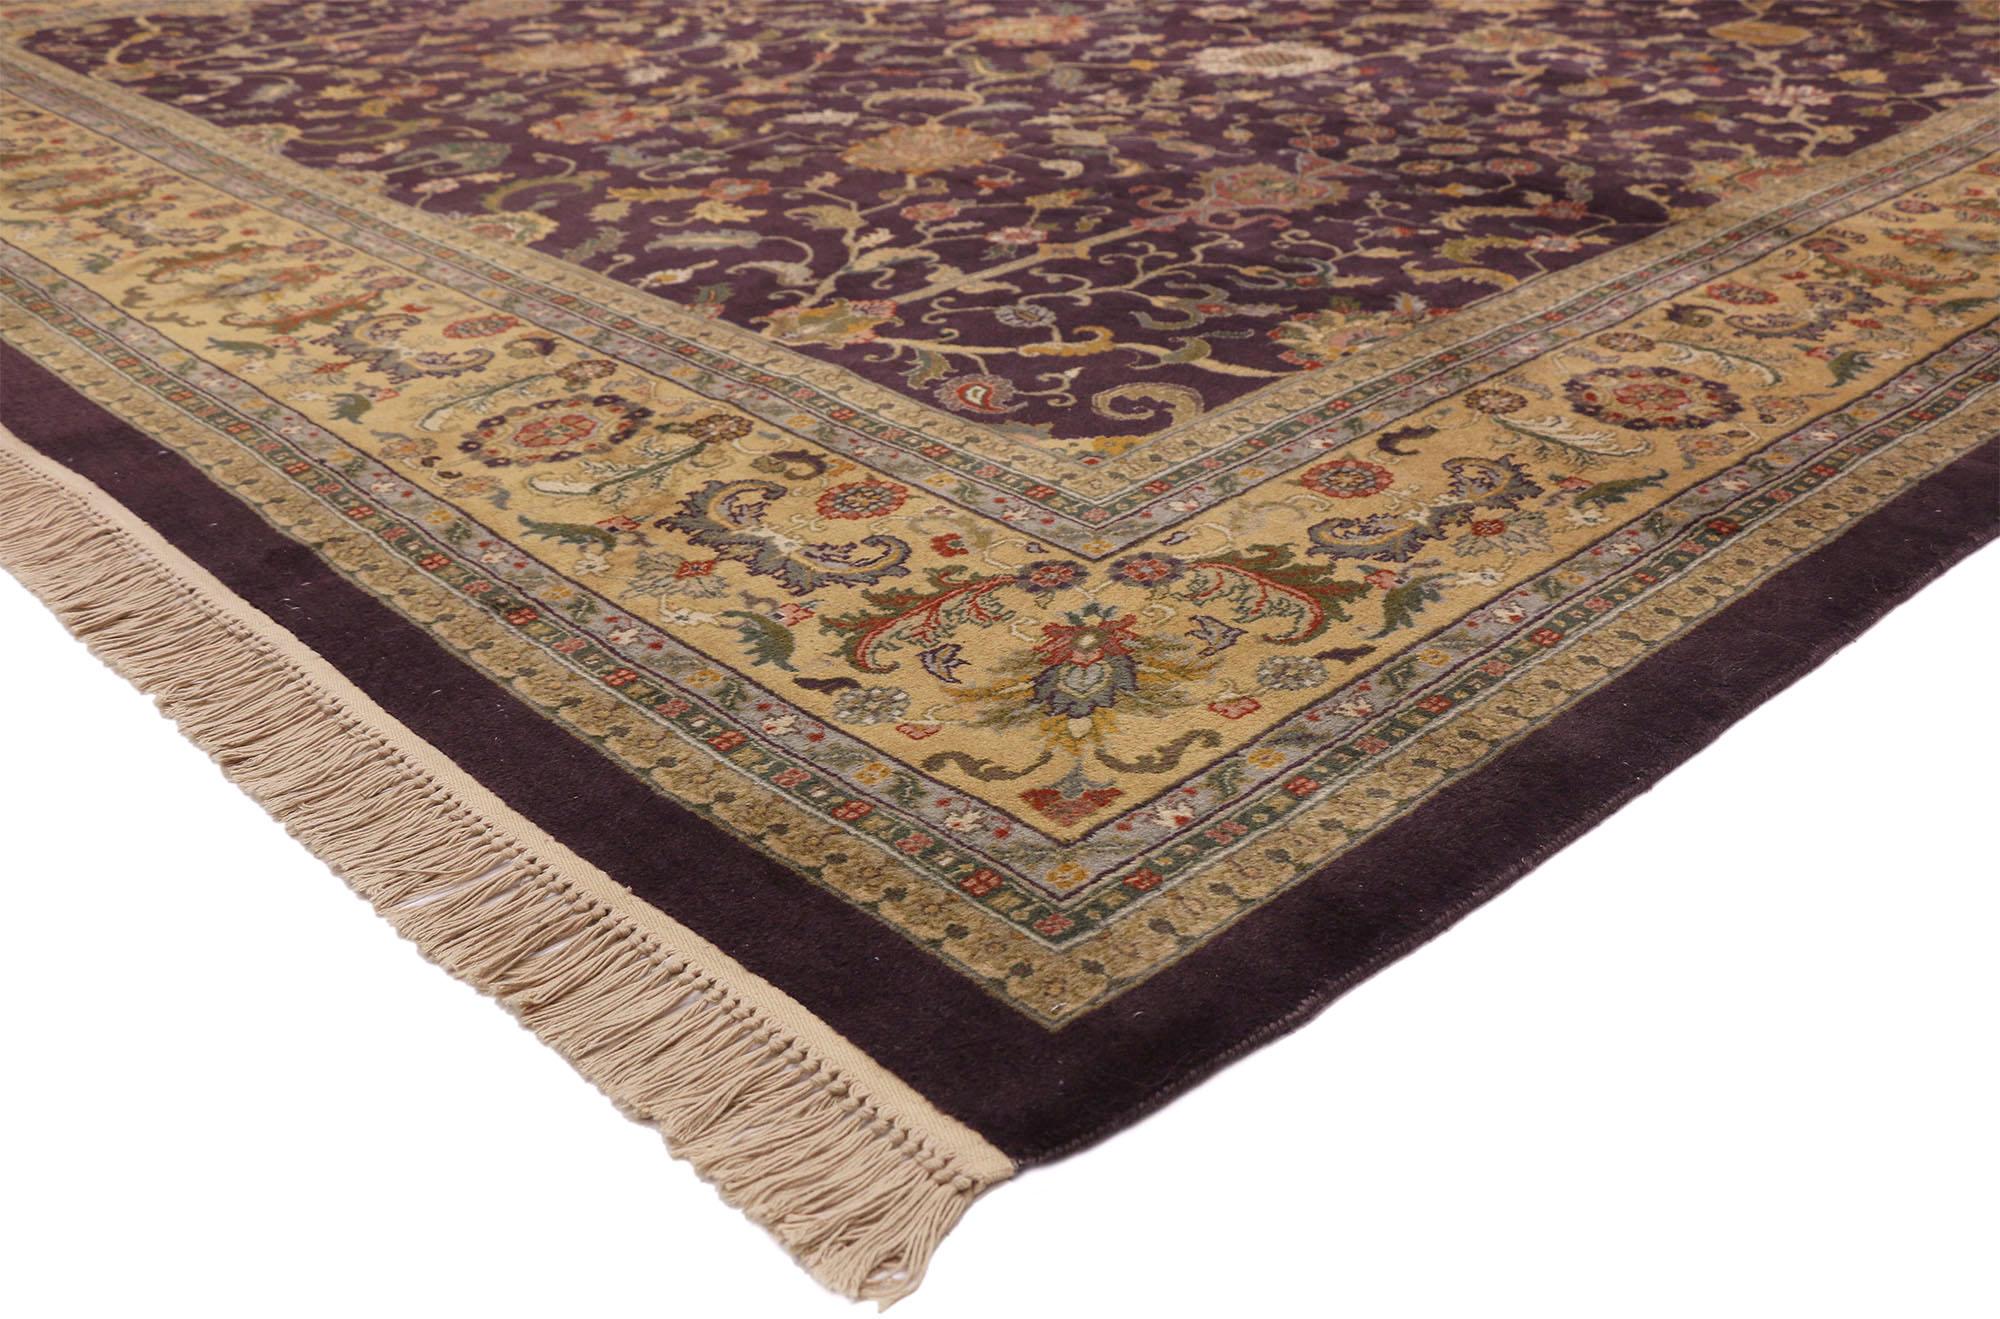 77316 Oversized Vintage Aubergine Indian Rug, 11'03 x 17'08. This oversized vintage Indian rug exudes the captivating allure of India with its mesmerizing design and rich color palette. Hand-knotted from wool, it boasts a lively botanical pattern